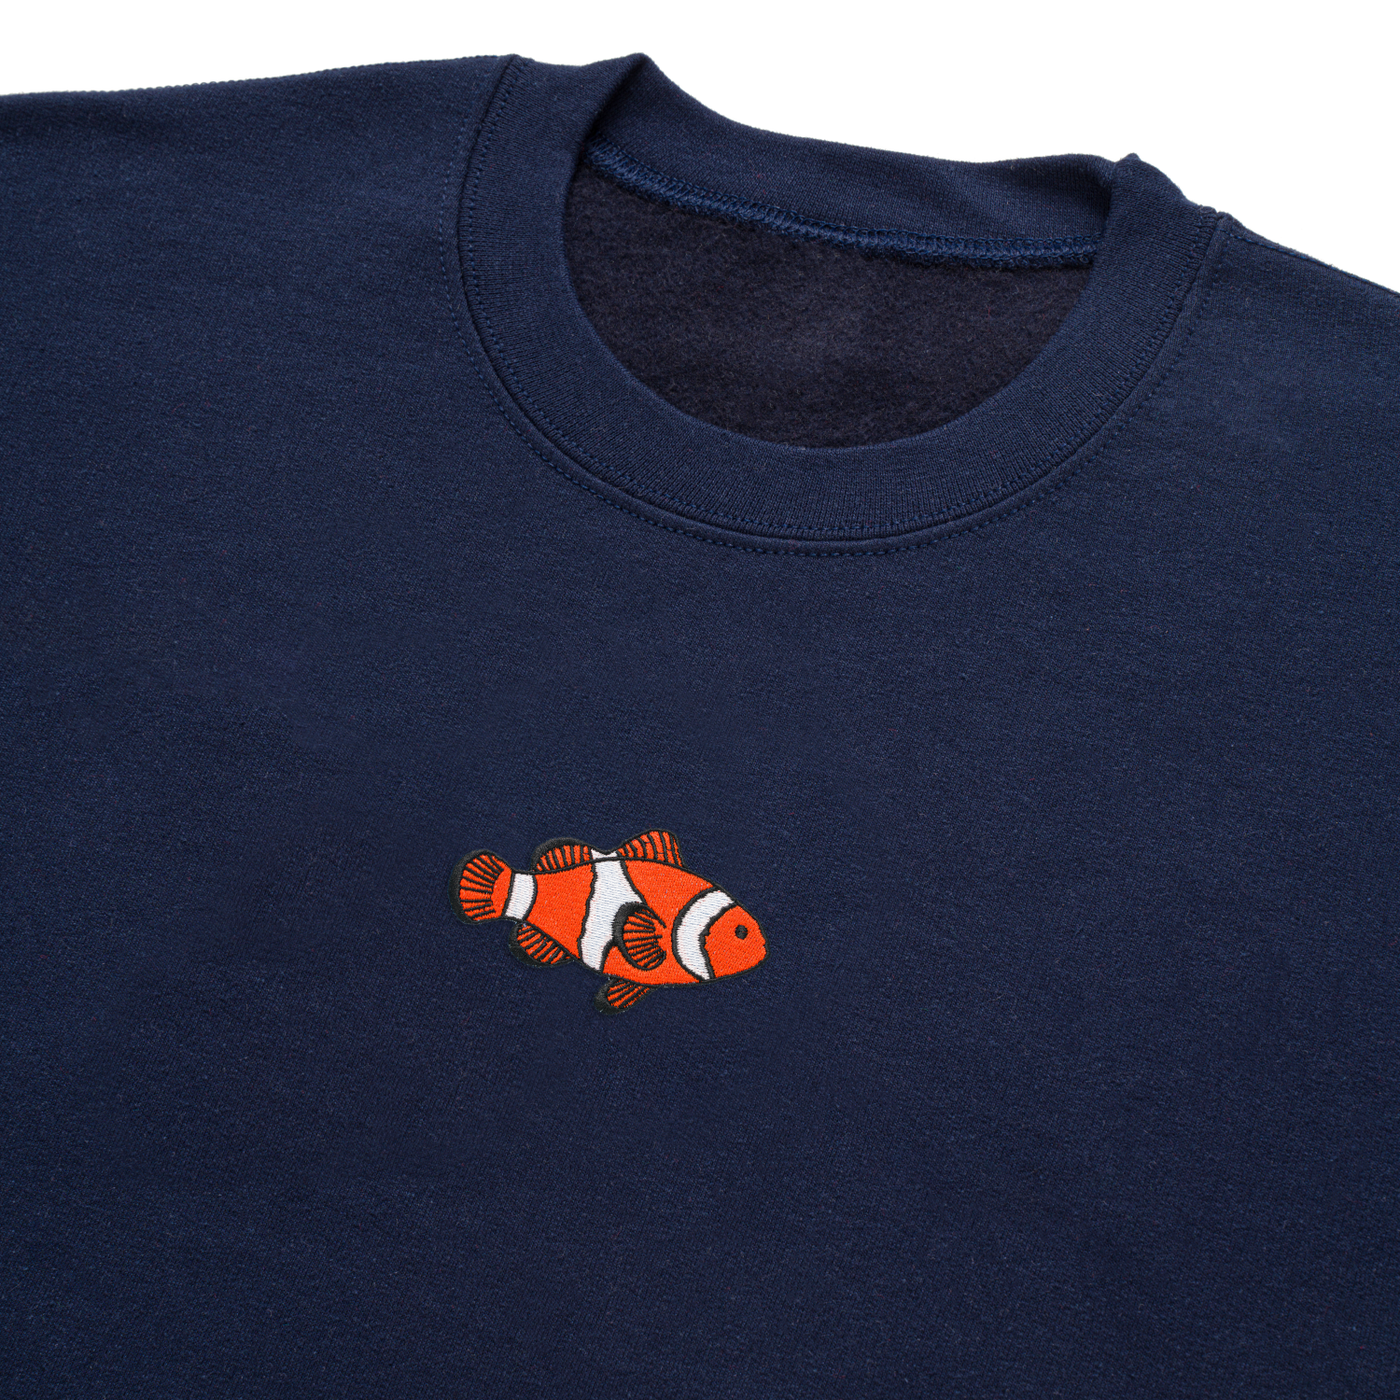 Bobby's Planet Women's Embroidered Clownfish Sweatshirt from Seven Seas Fish Animals Collection in Navy Color#color_navy